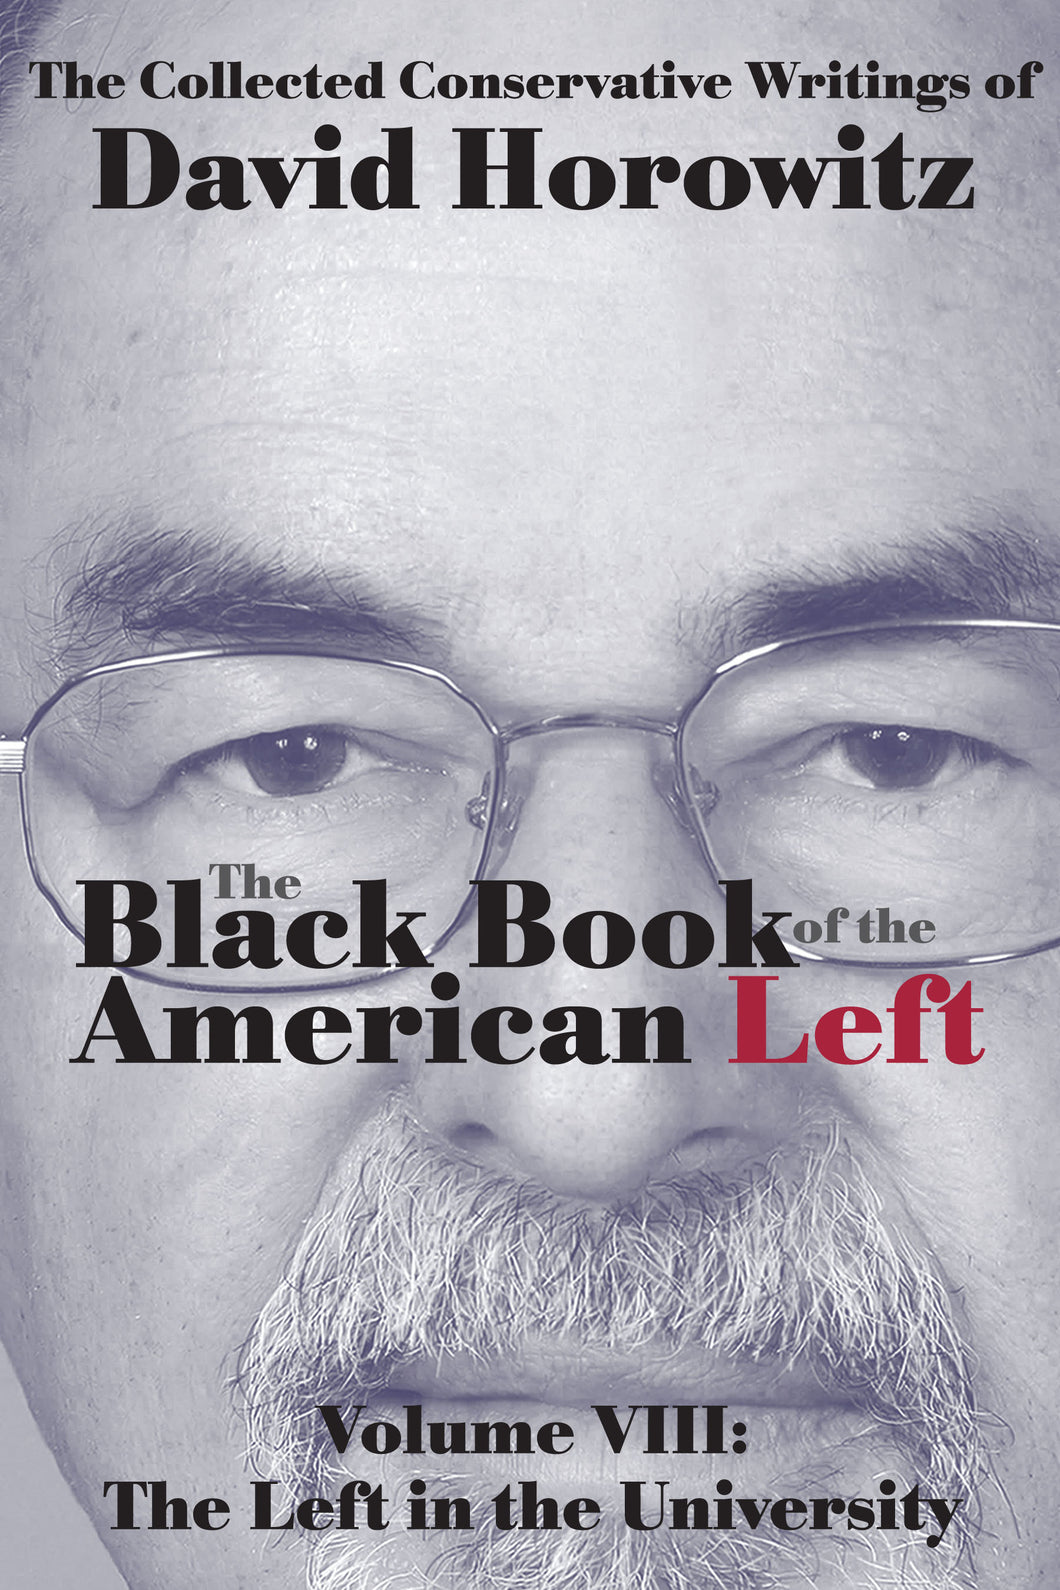 The Black Book of the American Left Volume VIII: The Left in the University